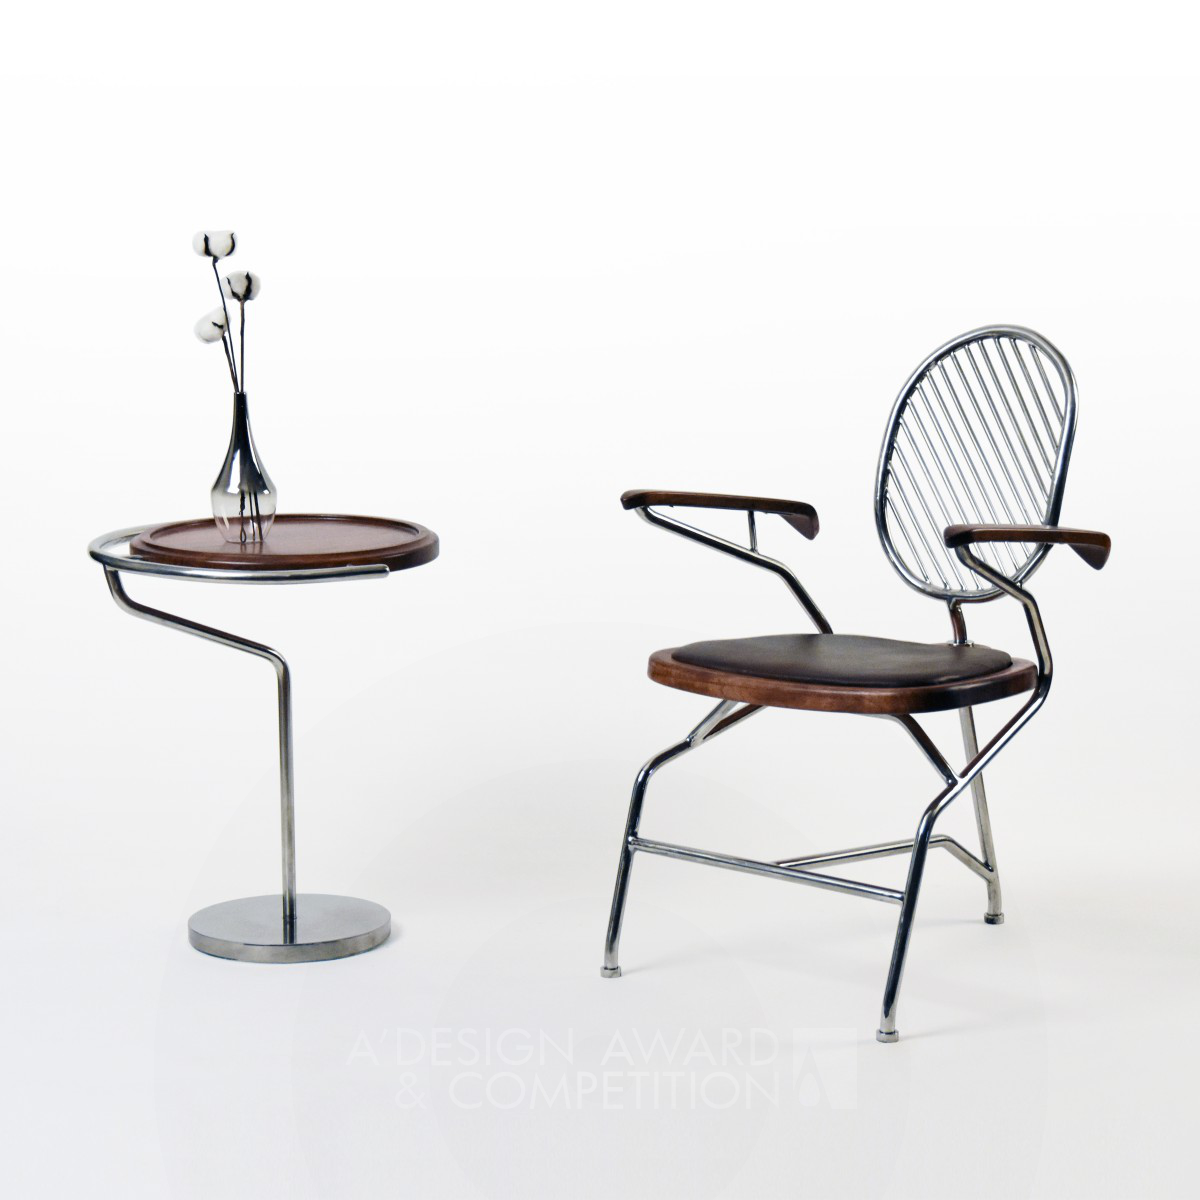 Wei Jingye wins Iron at the prestigious A' Furniture Design Award with Elegance Comfortable To Use.